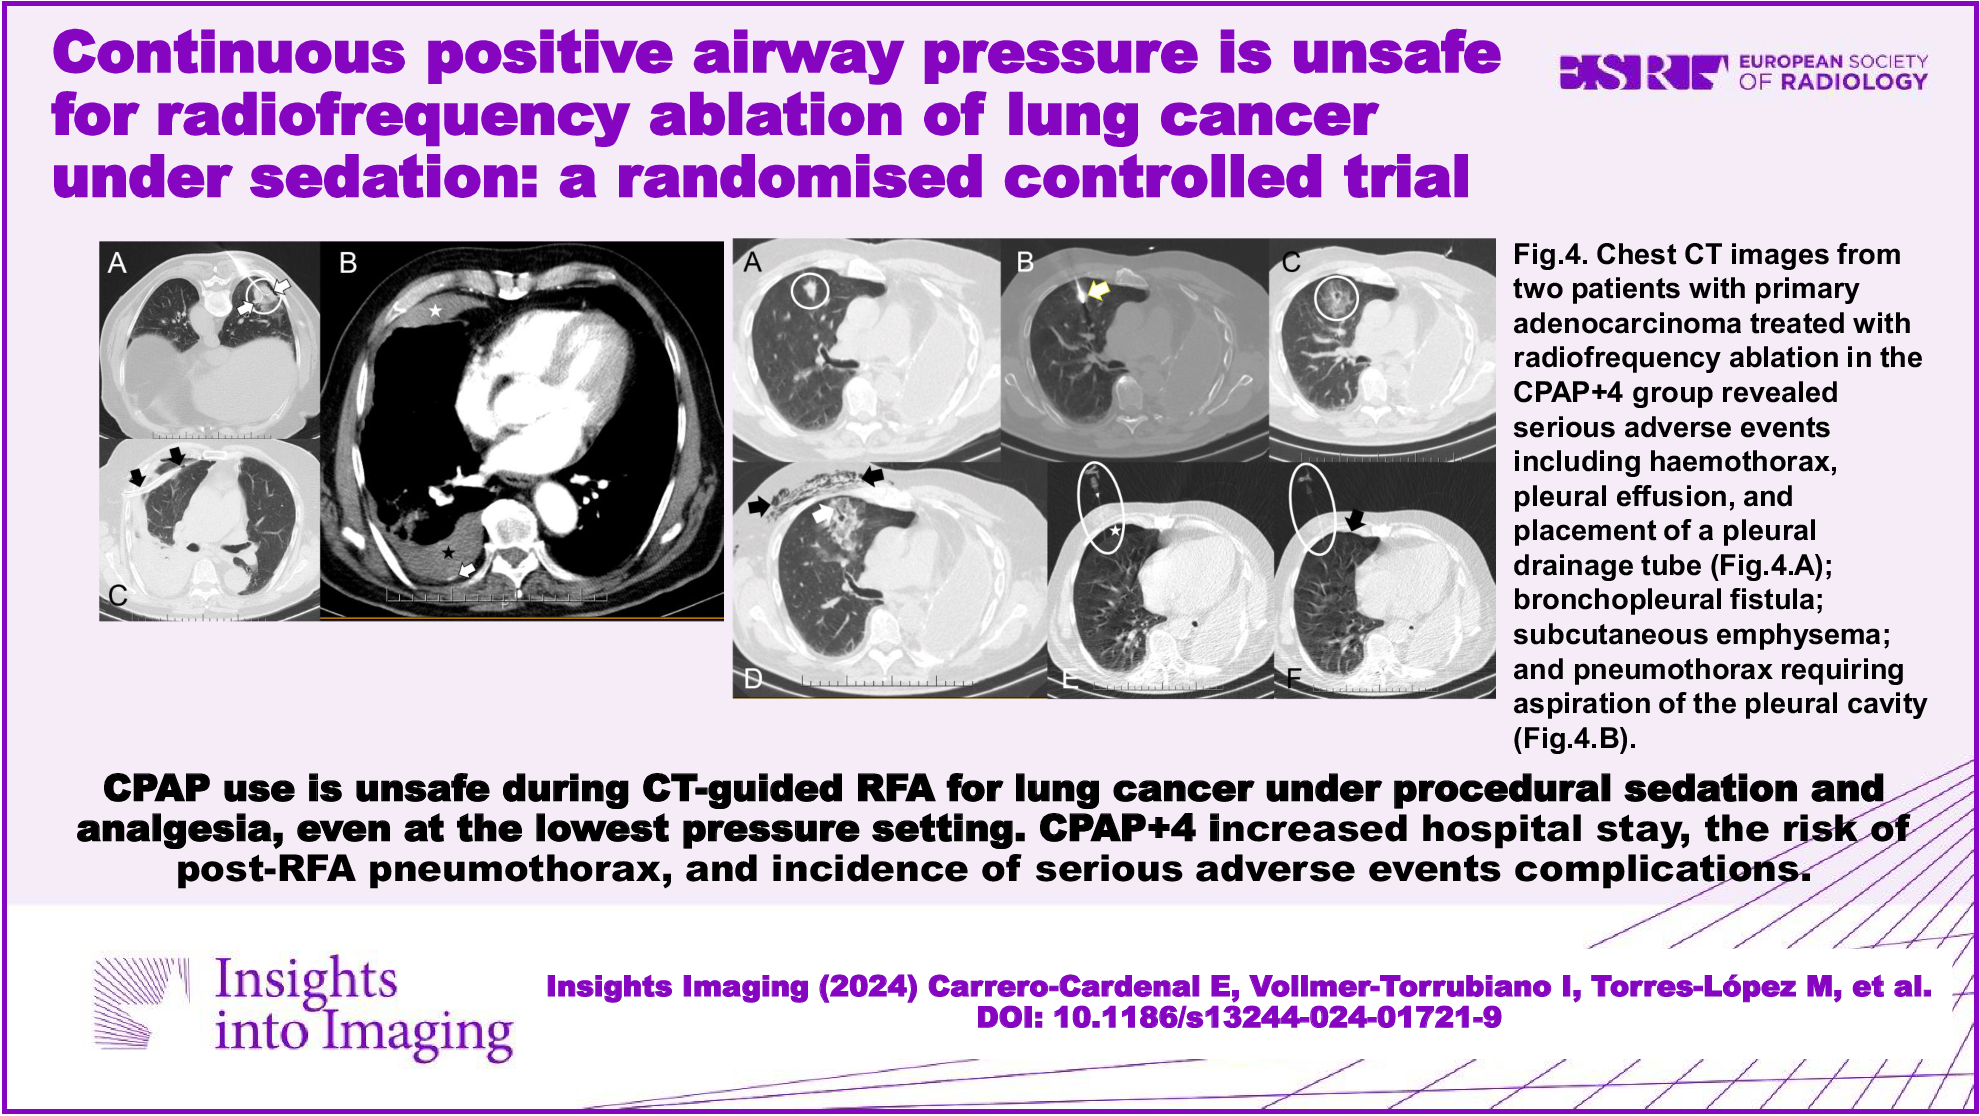 Continuous positive airway pressure is unsafe for radiofrequency ablation of lung cancer under sedation: a randomised controlled trial